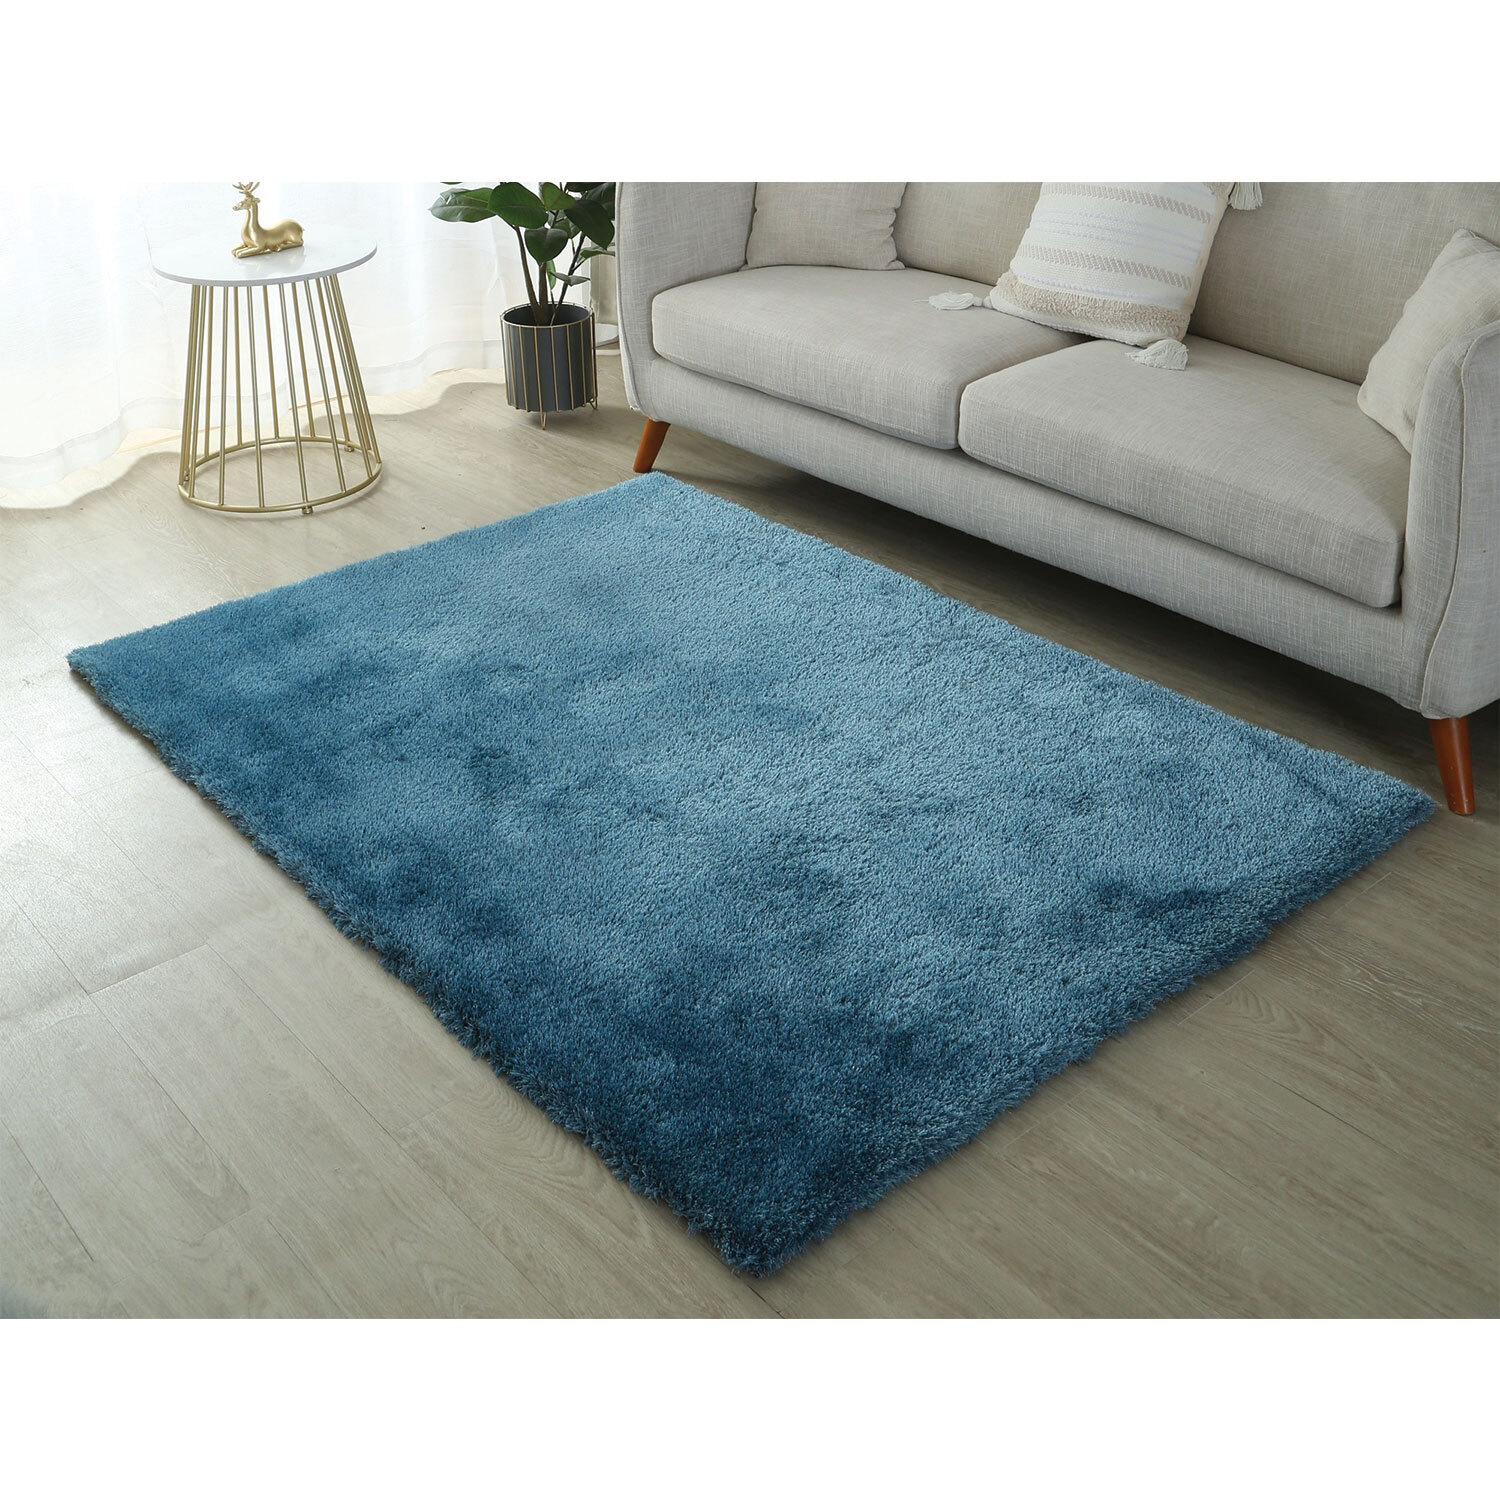 Deluxe Shaggy Rug - Radiant Blue / 90cm Image 2